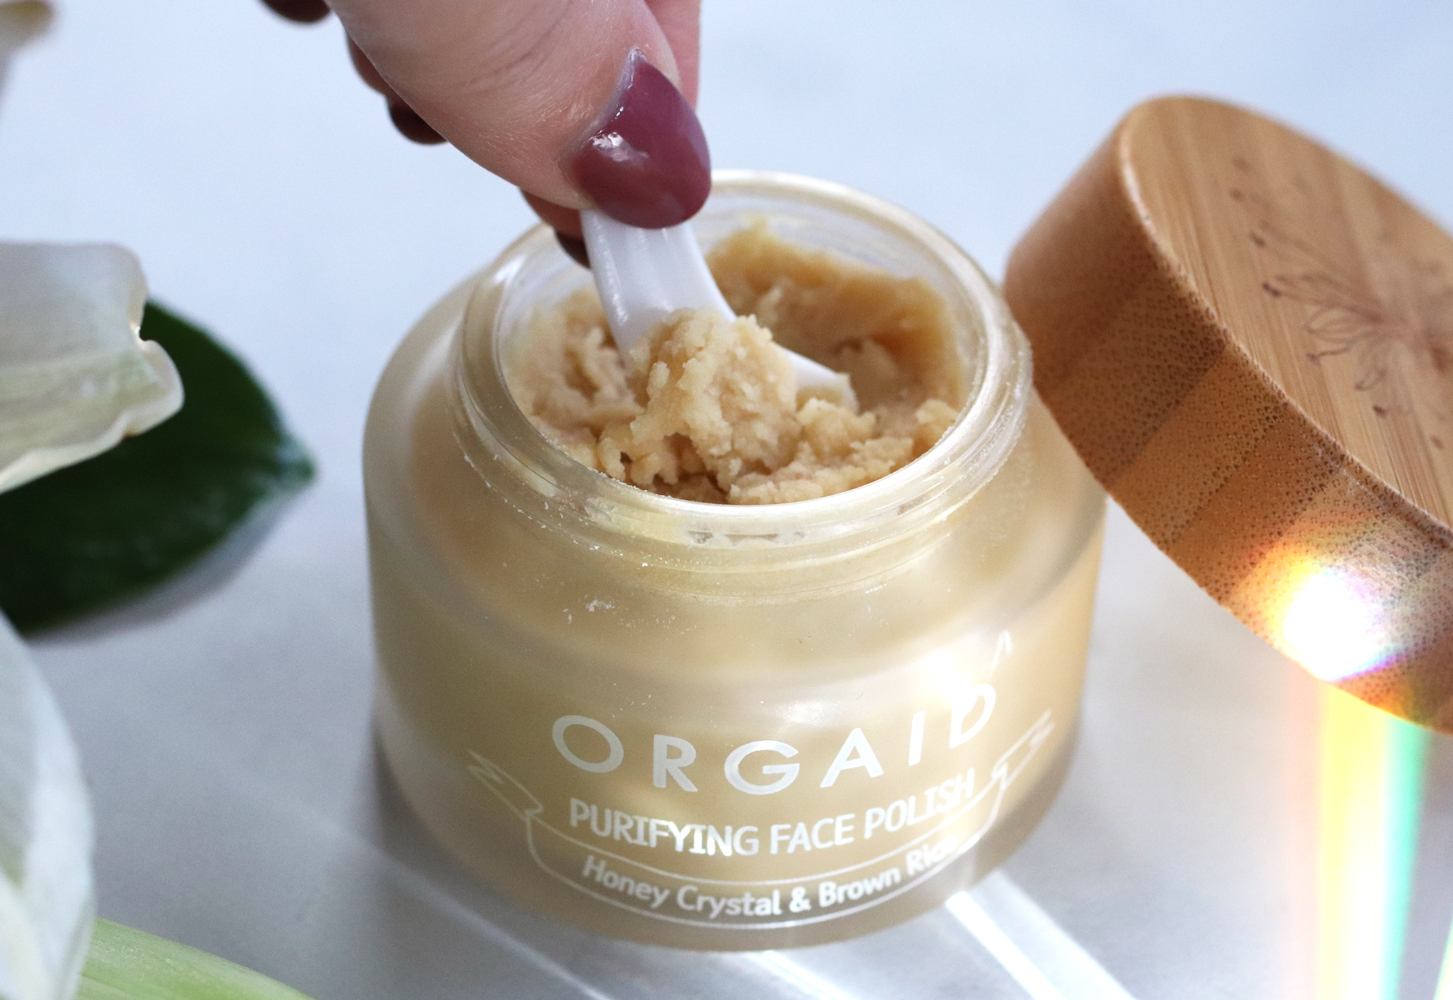 Cruelty free beauty from Cynaglow - ORGAID Purifying Face Polish review